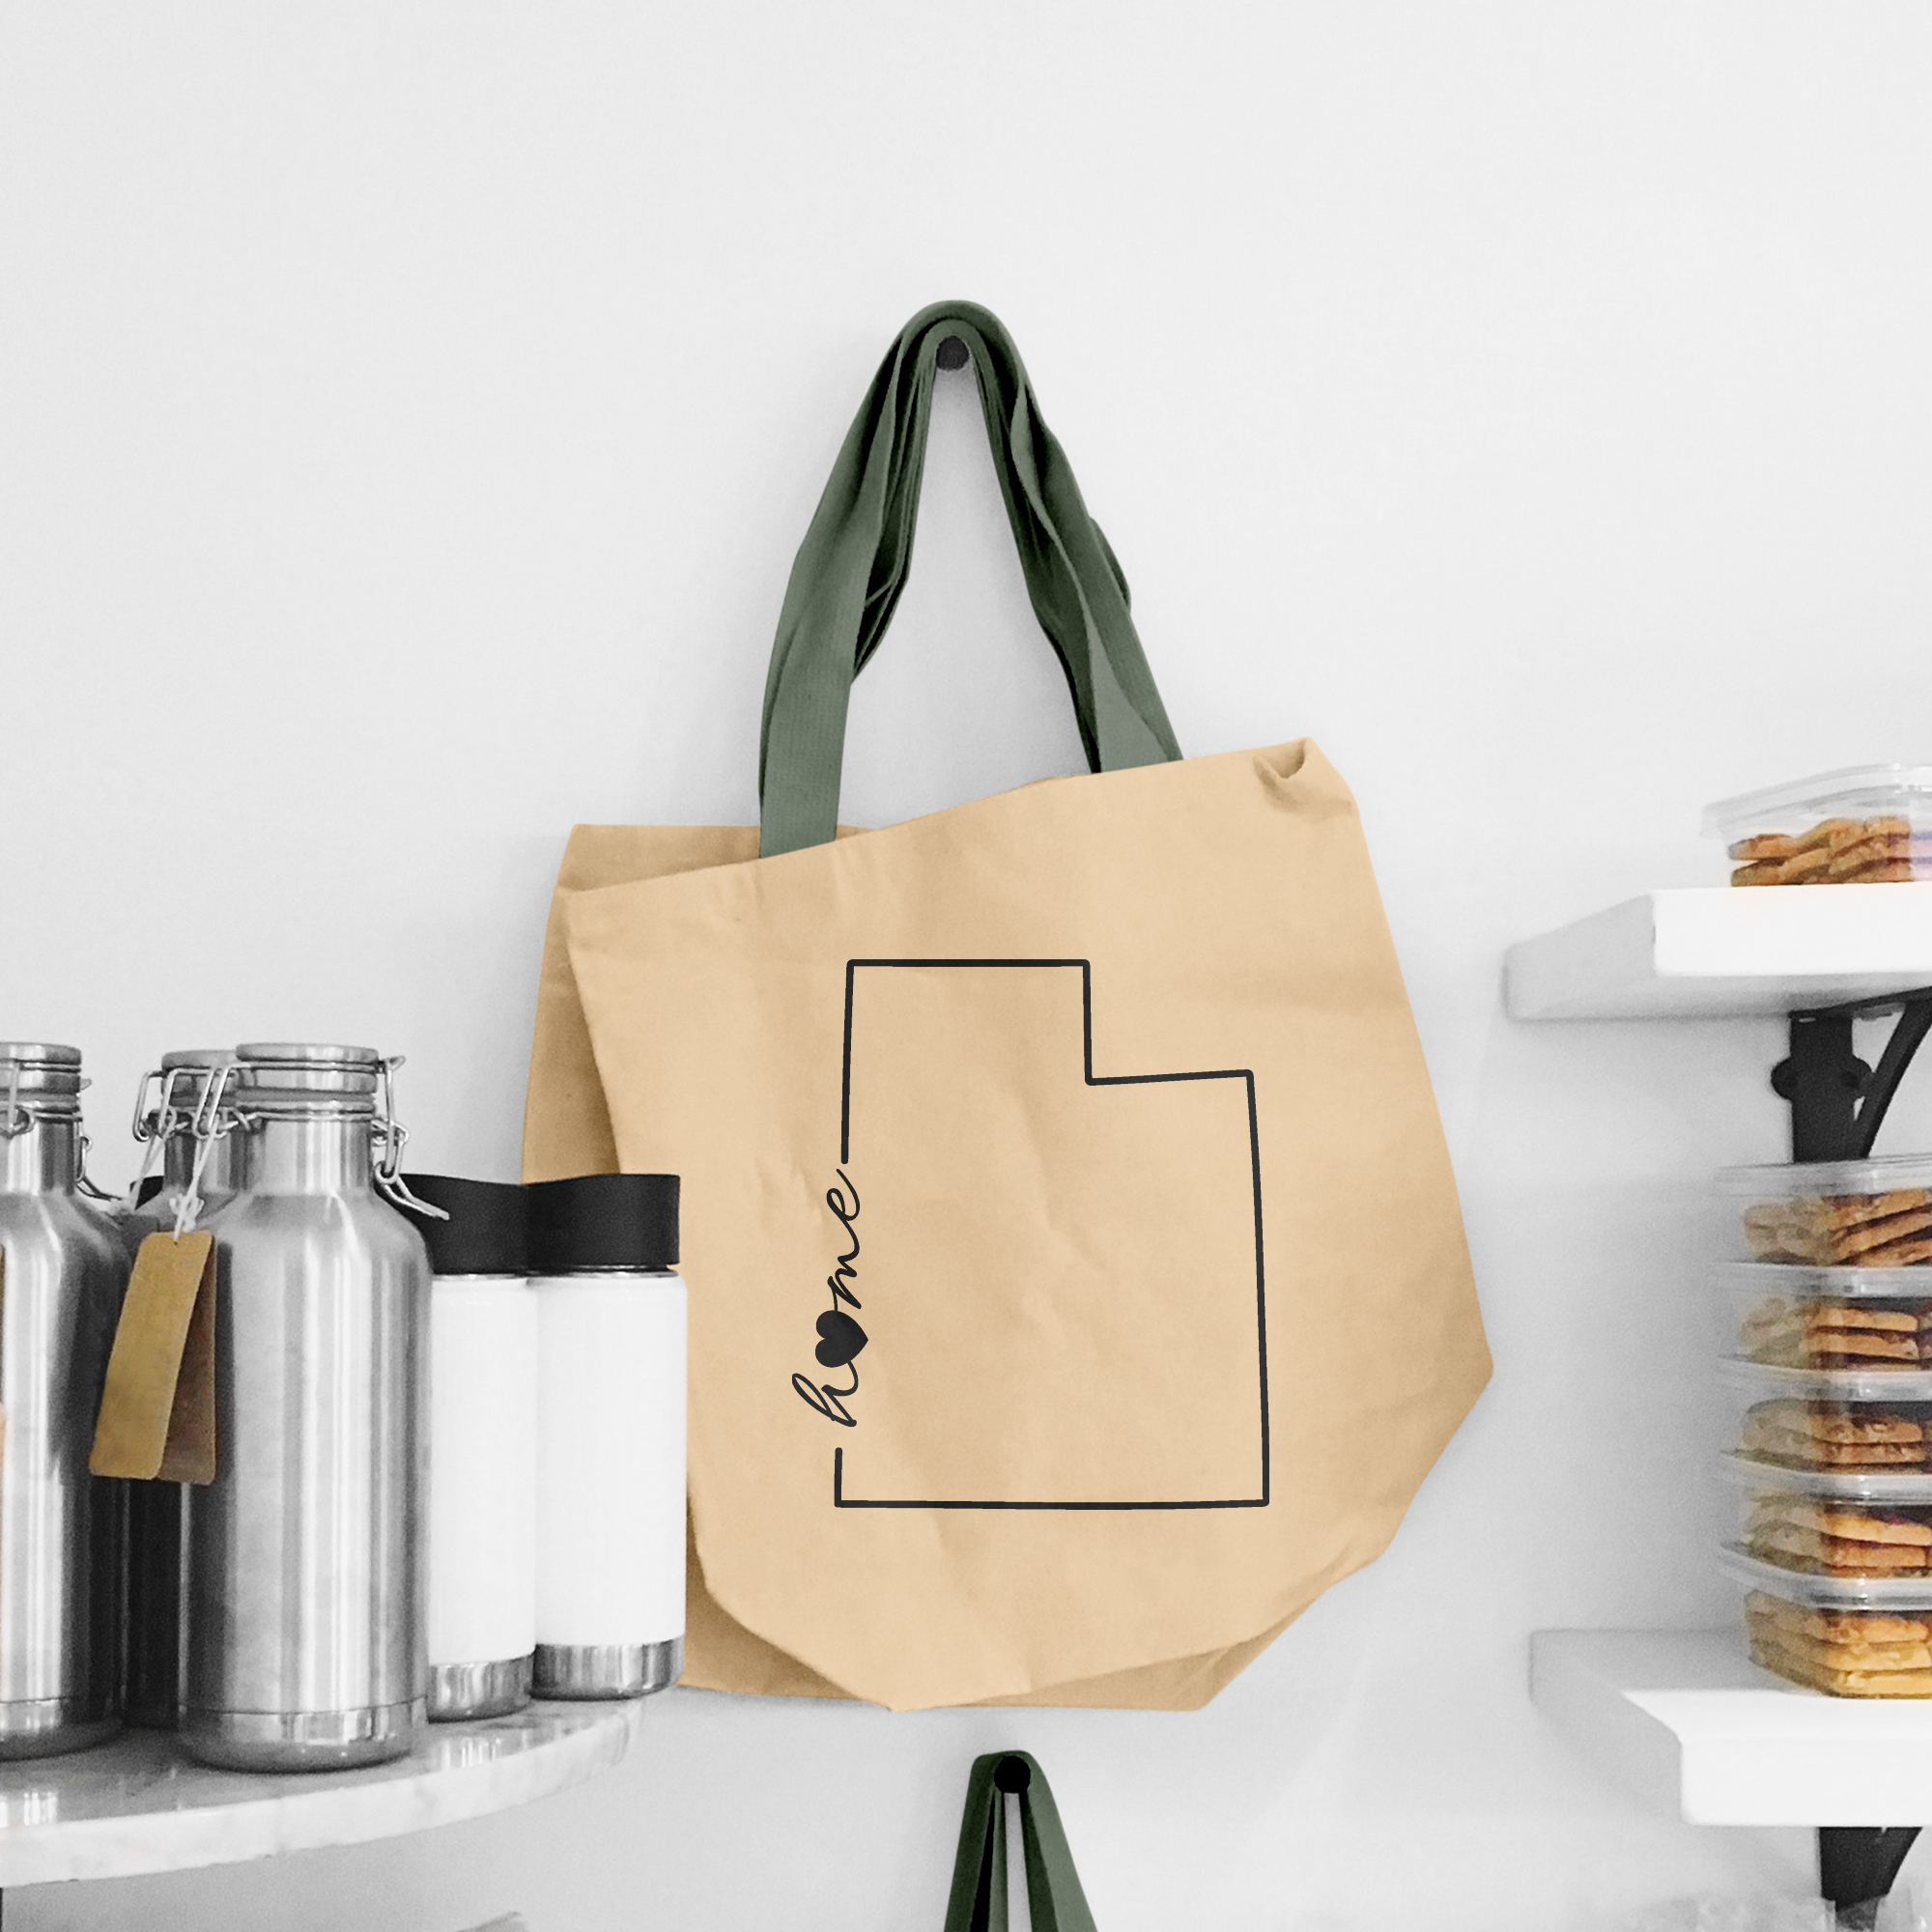 Black illustration of map of Utah on the beige shopping bag with dirty green handle.